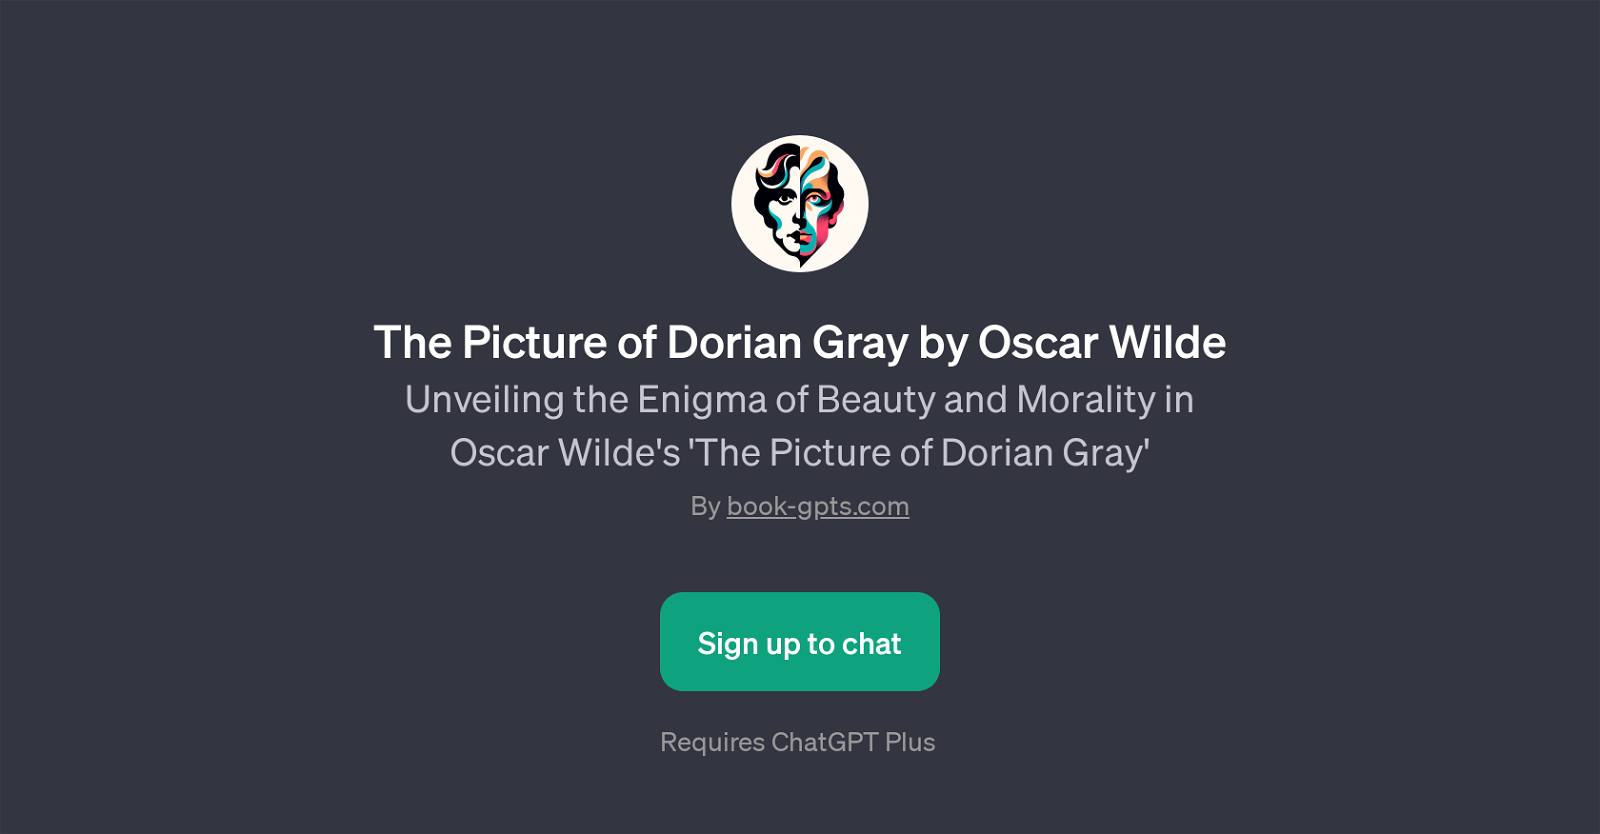 The Picture of Dorian Gray by Oscar Wilde GPT website